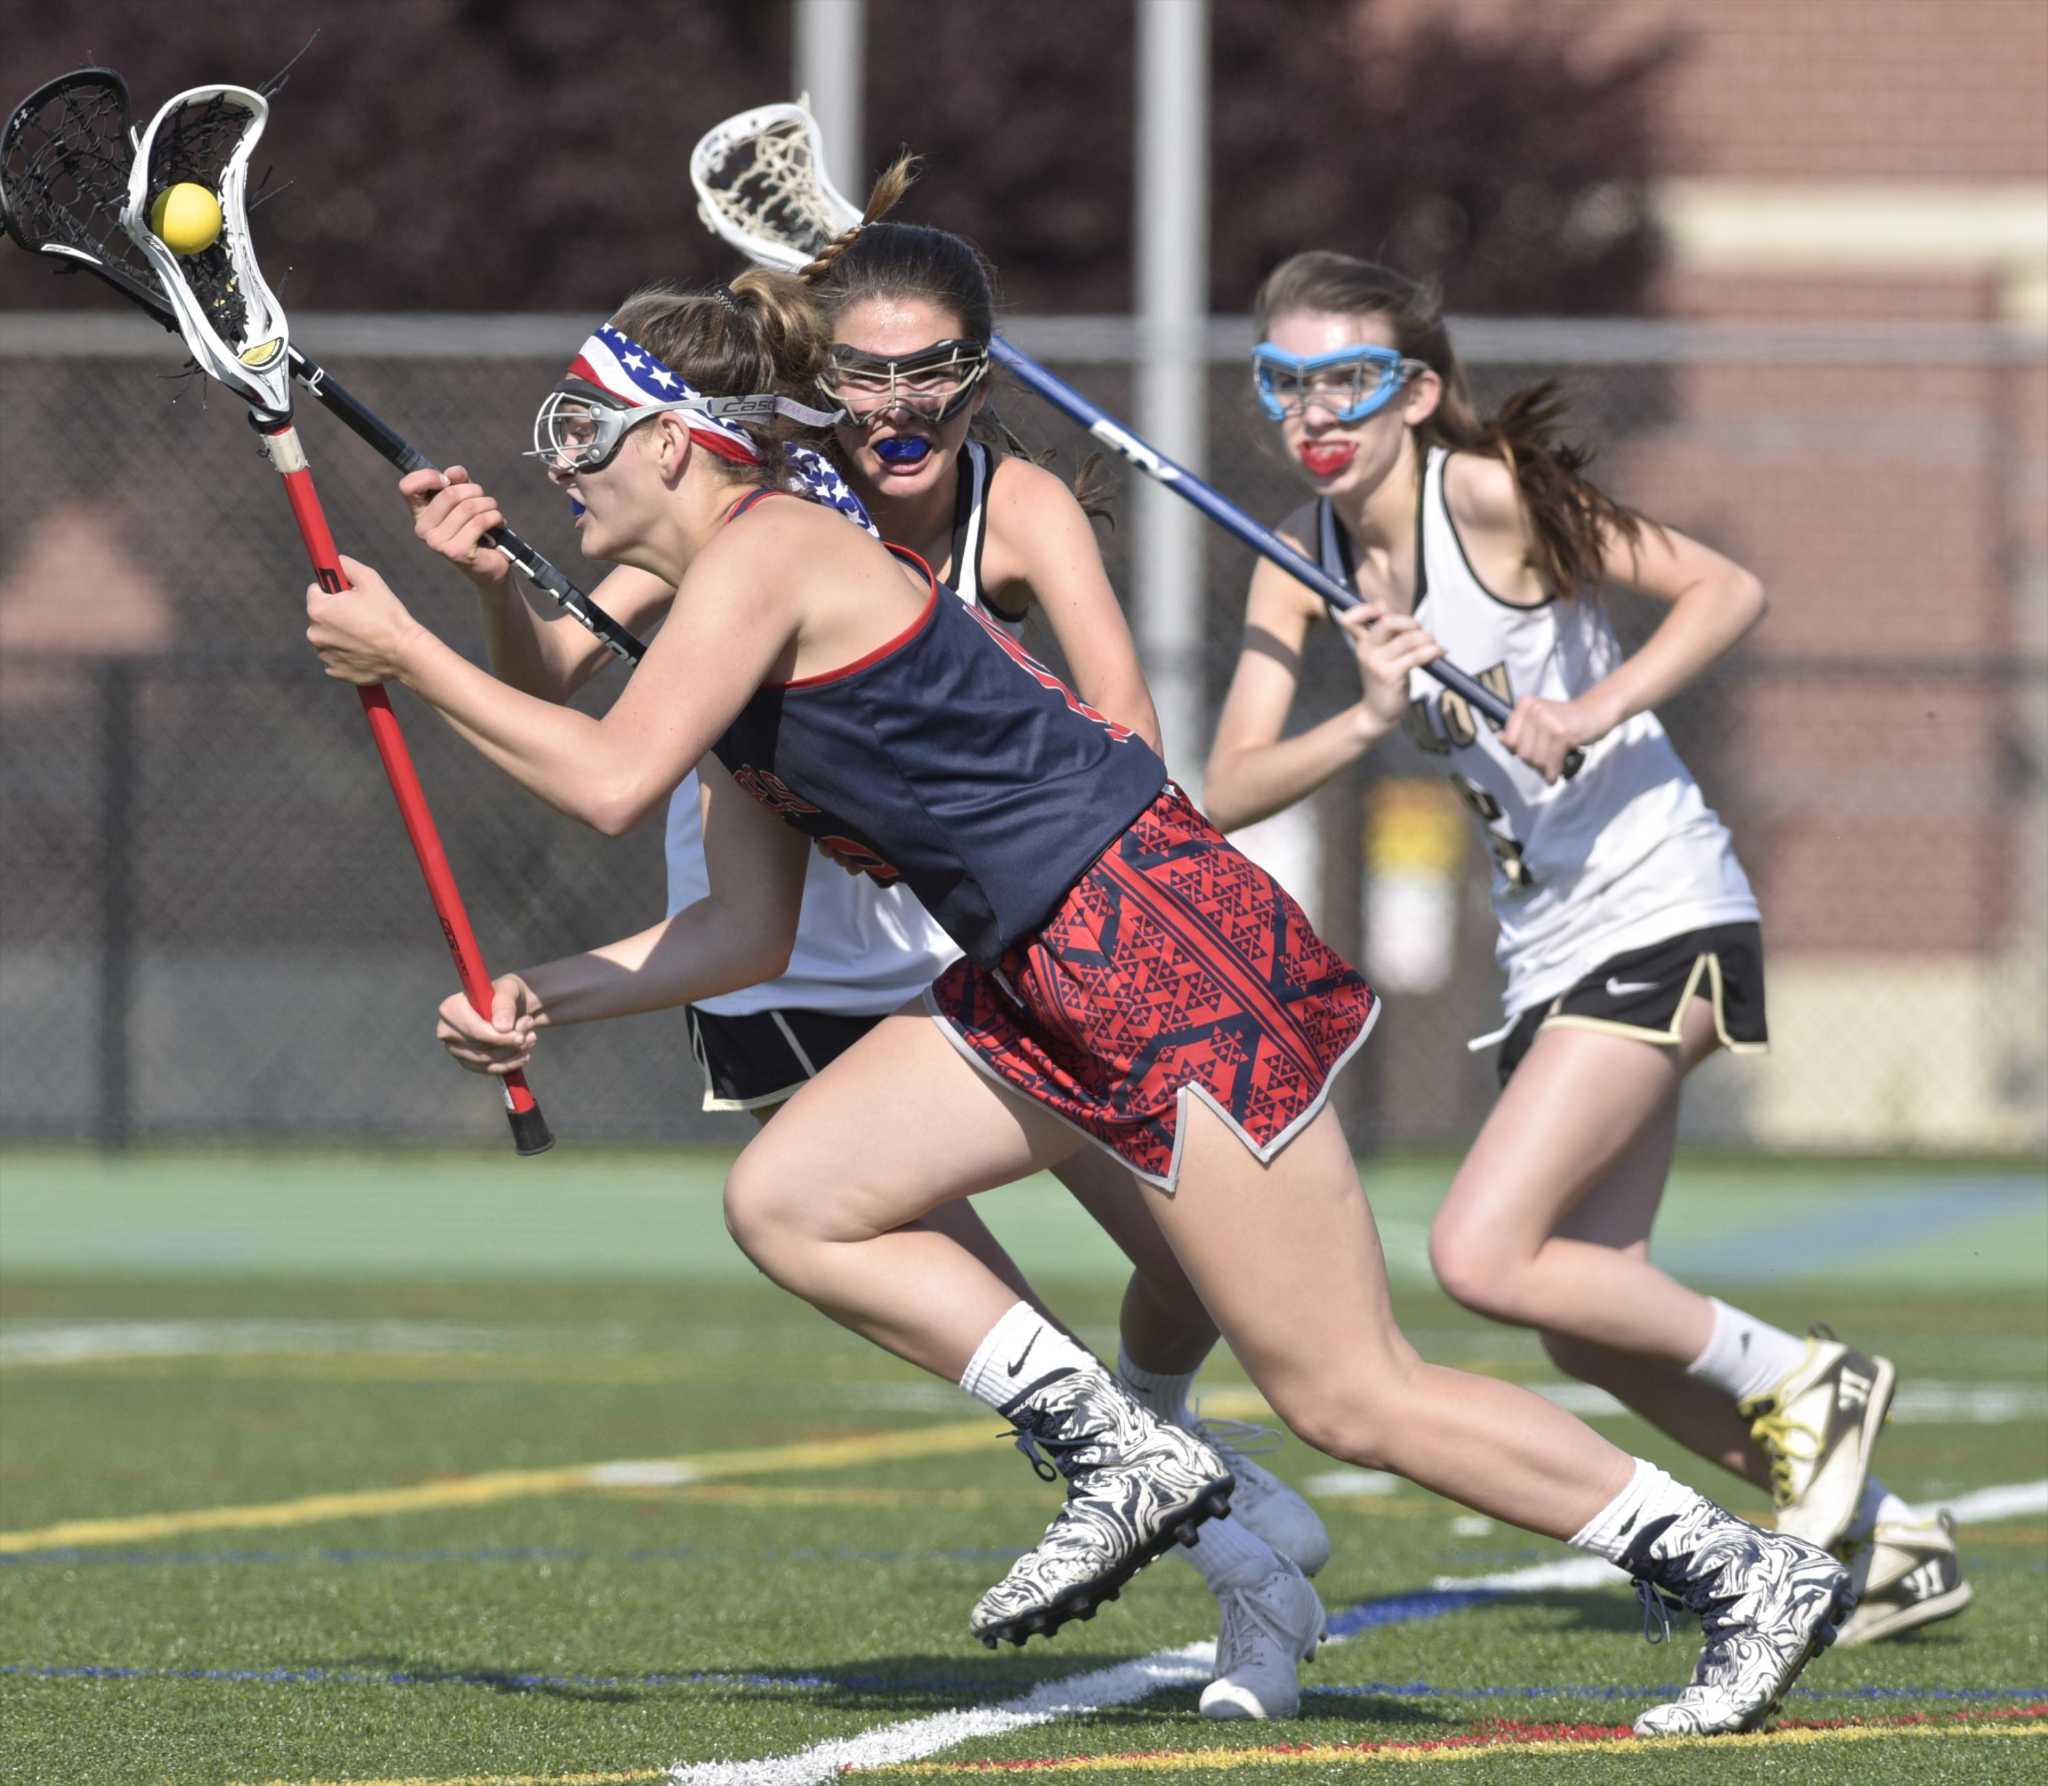 New Fairfield girls hold off Barlow to capture SWC lacrosse crown